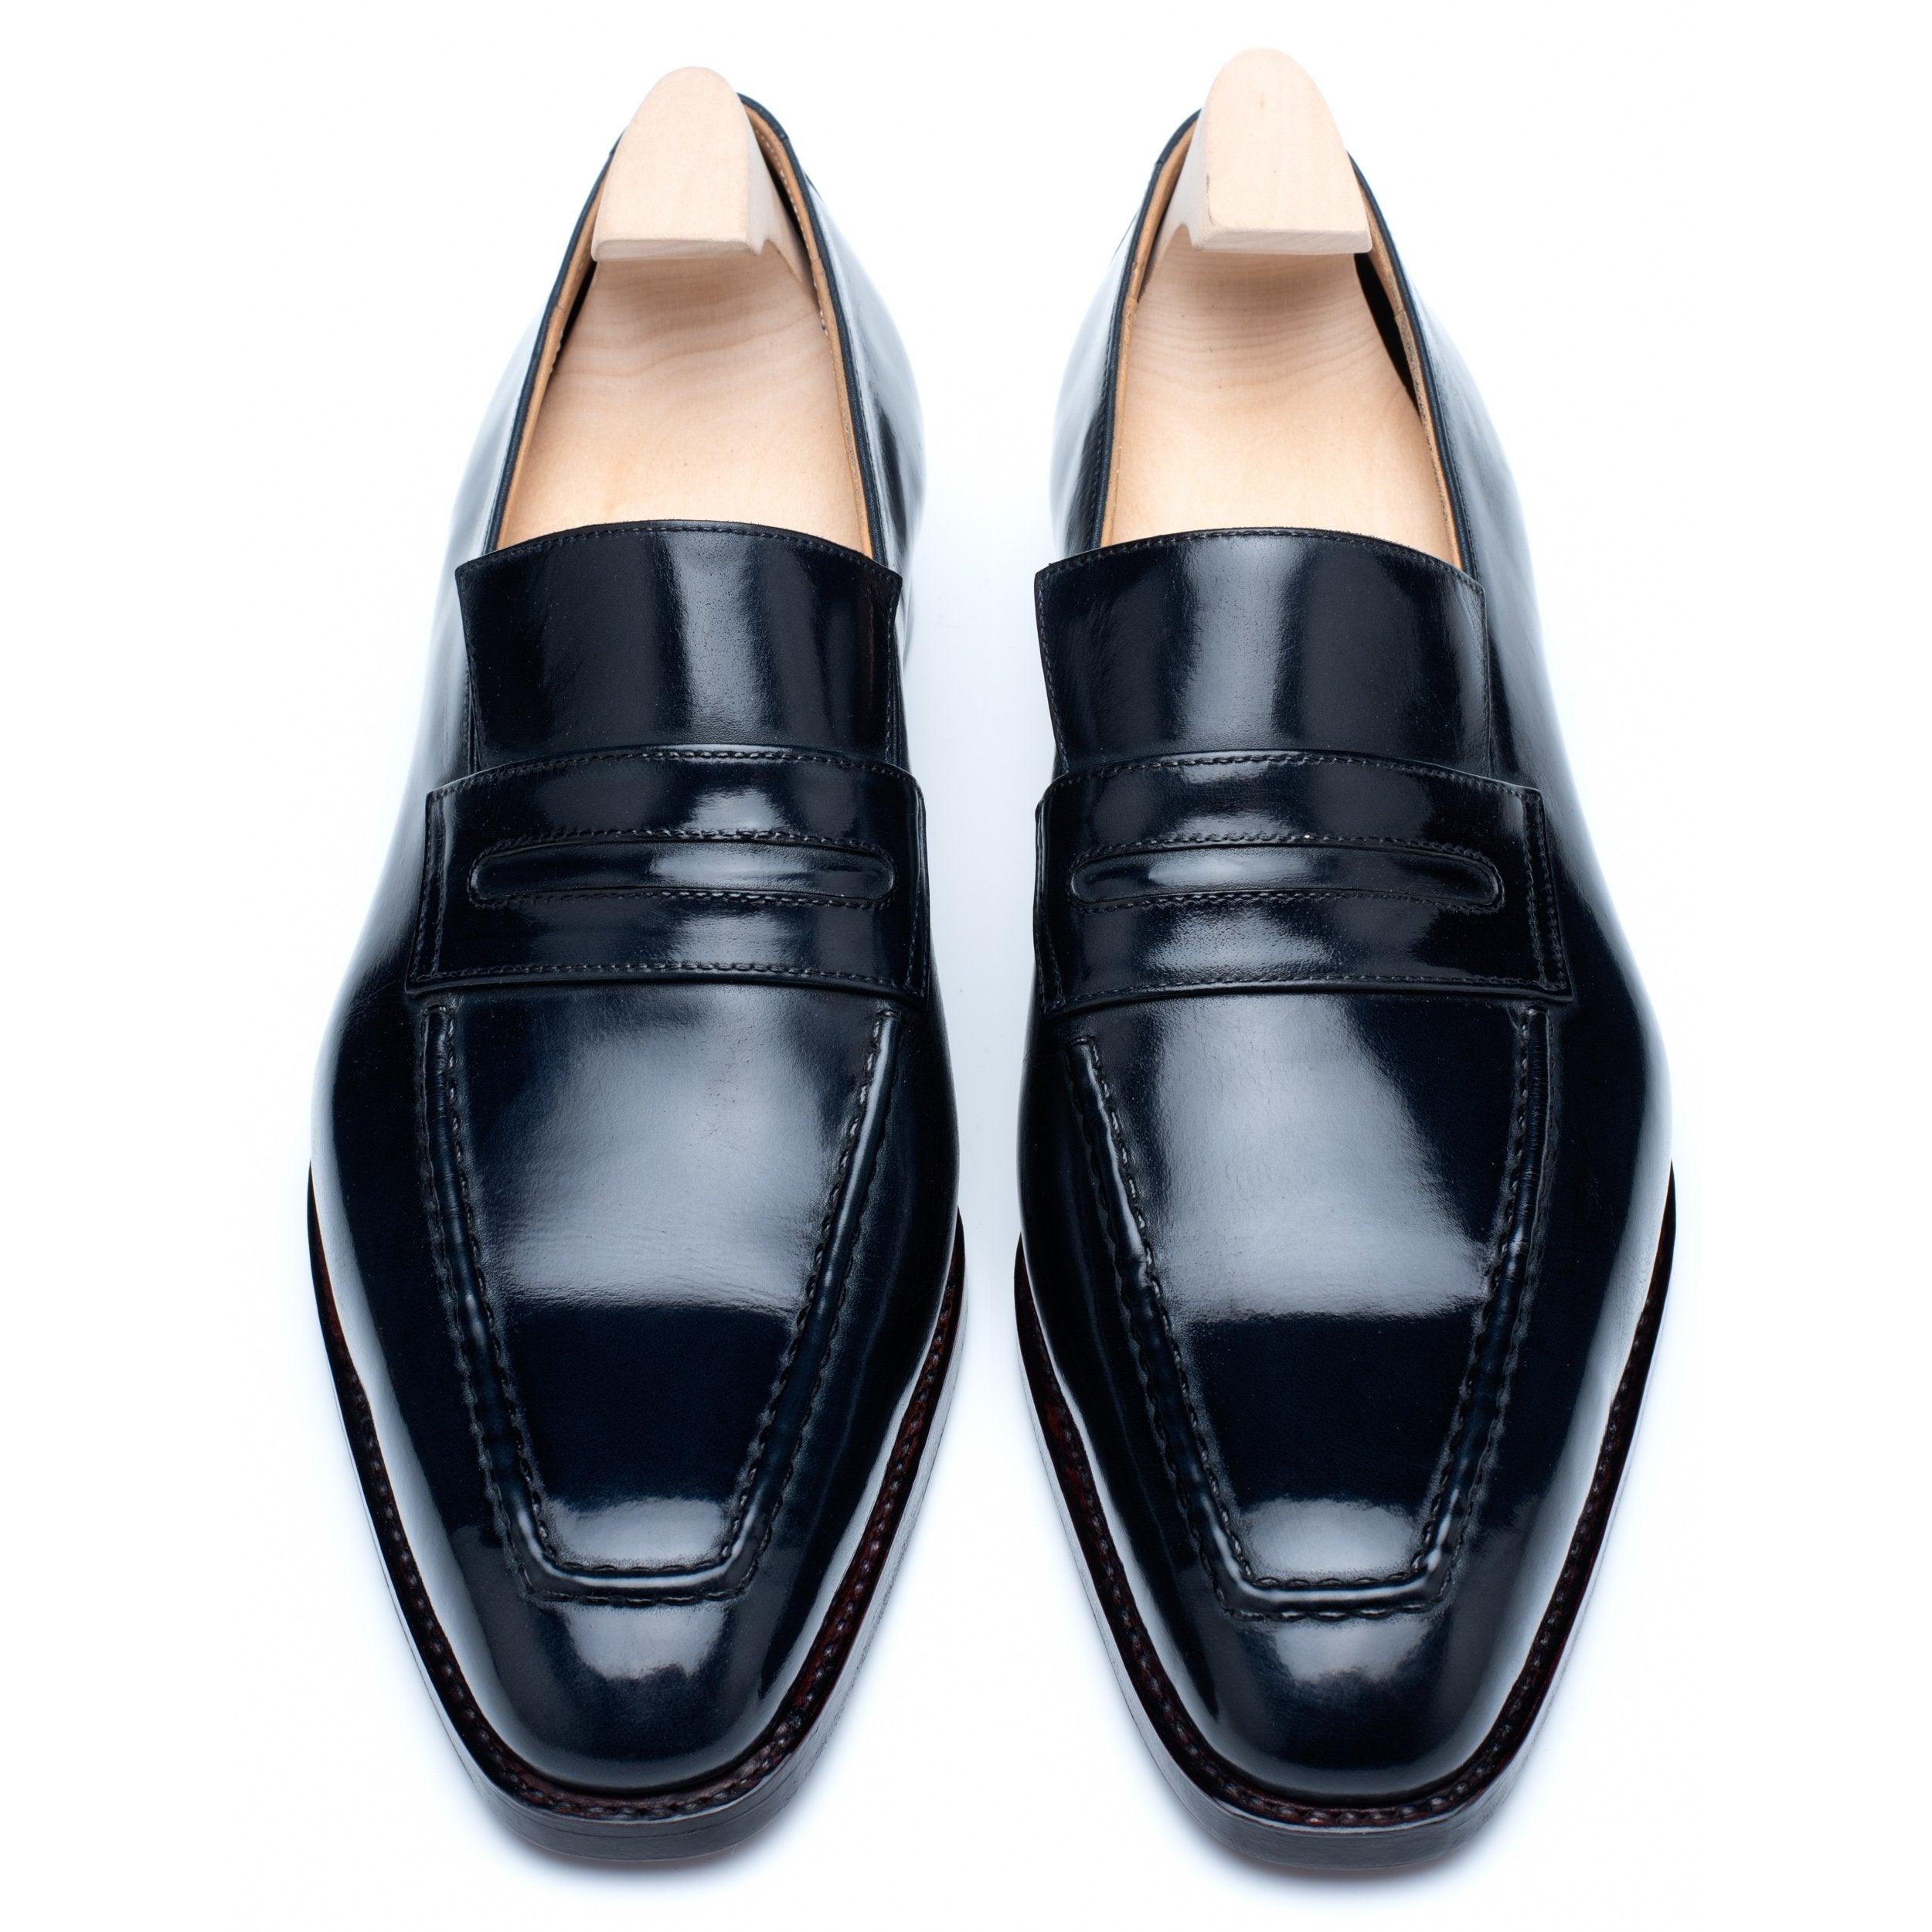 Møde dedikation vride PASSUS SHOES "Anthony" Navy Blue Box Calf Leather Loafers 9 42 – SARTORIALE